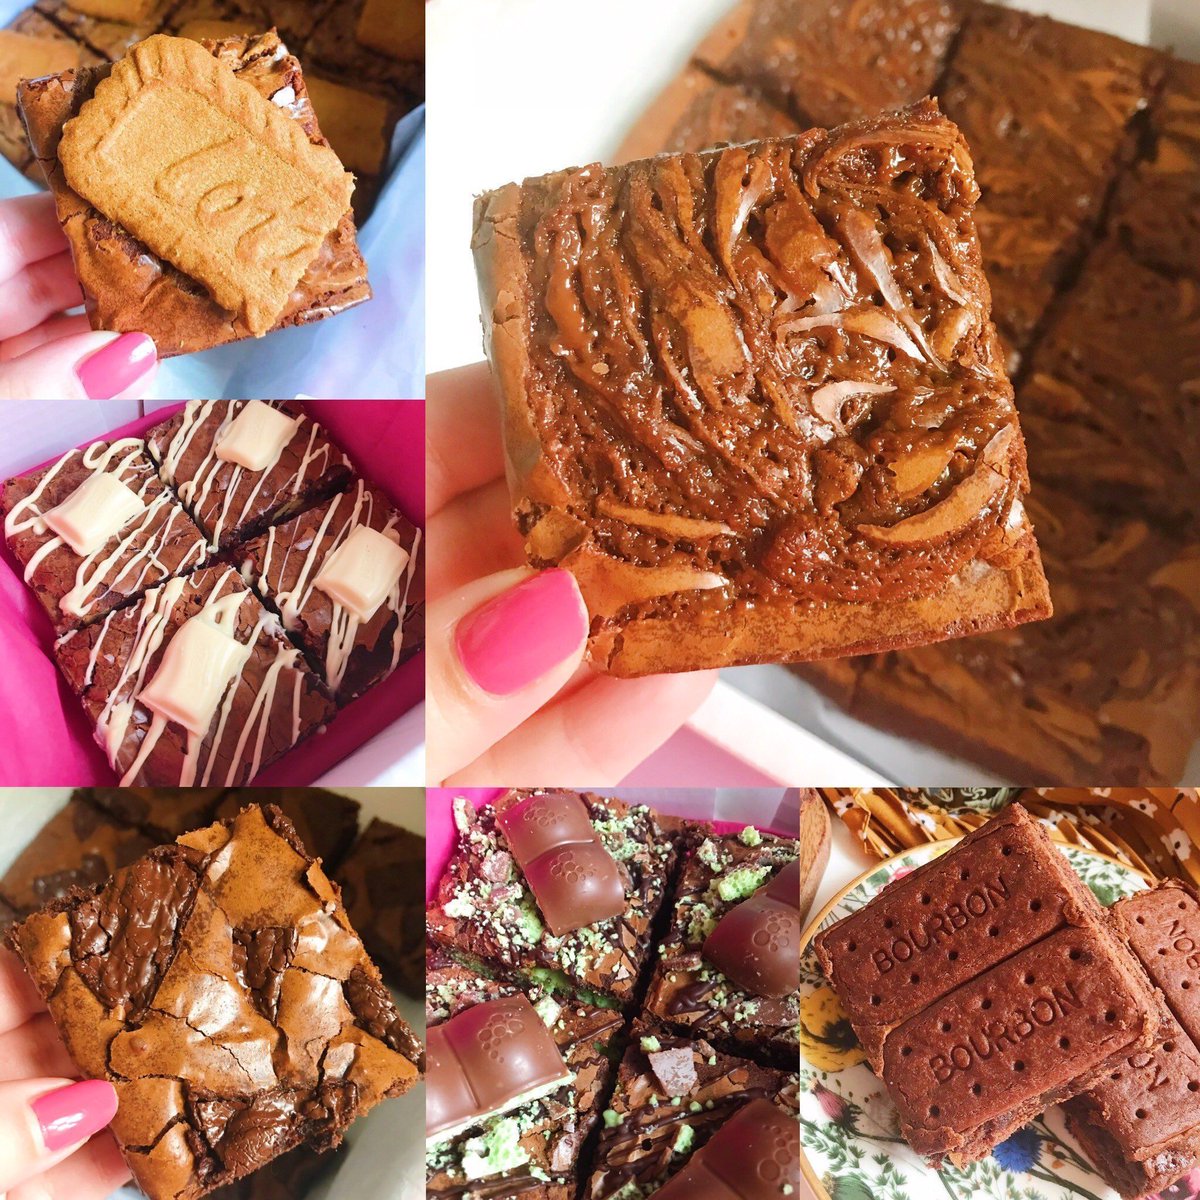 Come & see our delicious bakes & find something you'd like to treat yourself to 😍 2 days left to get 10% off 🍫 buff.ly/2Teh5bF @GRLPOWRCHAT @sincerelyessie #smallbusiness #foodbloggers